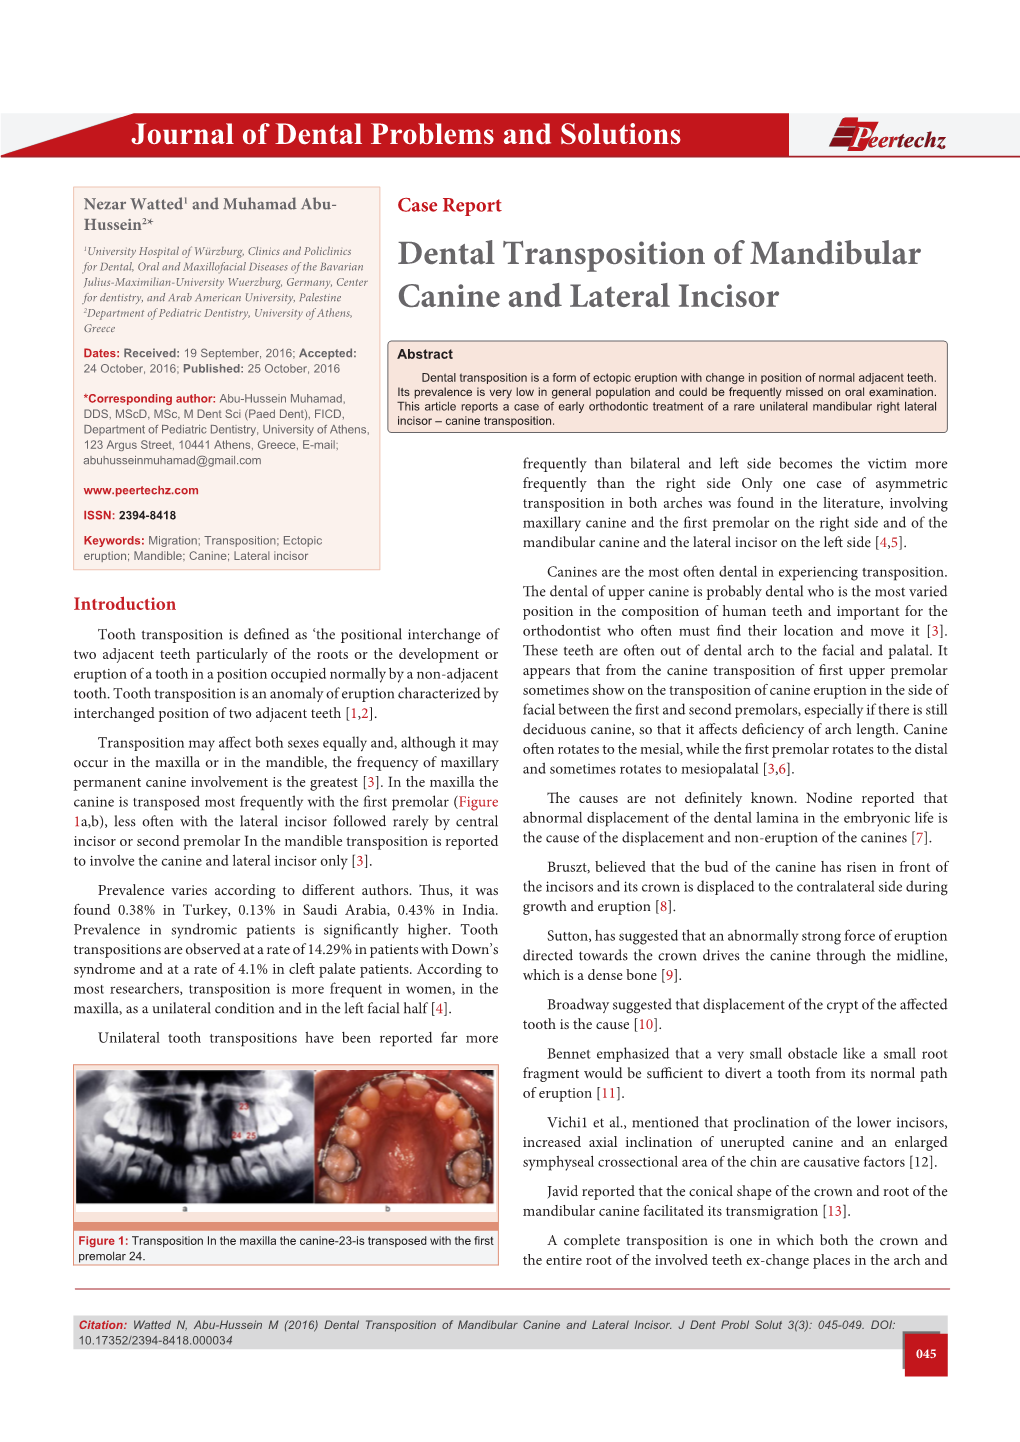 Dental Transposition of Mandibular Canine and Lateral Incisor